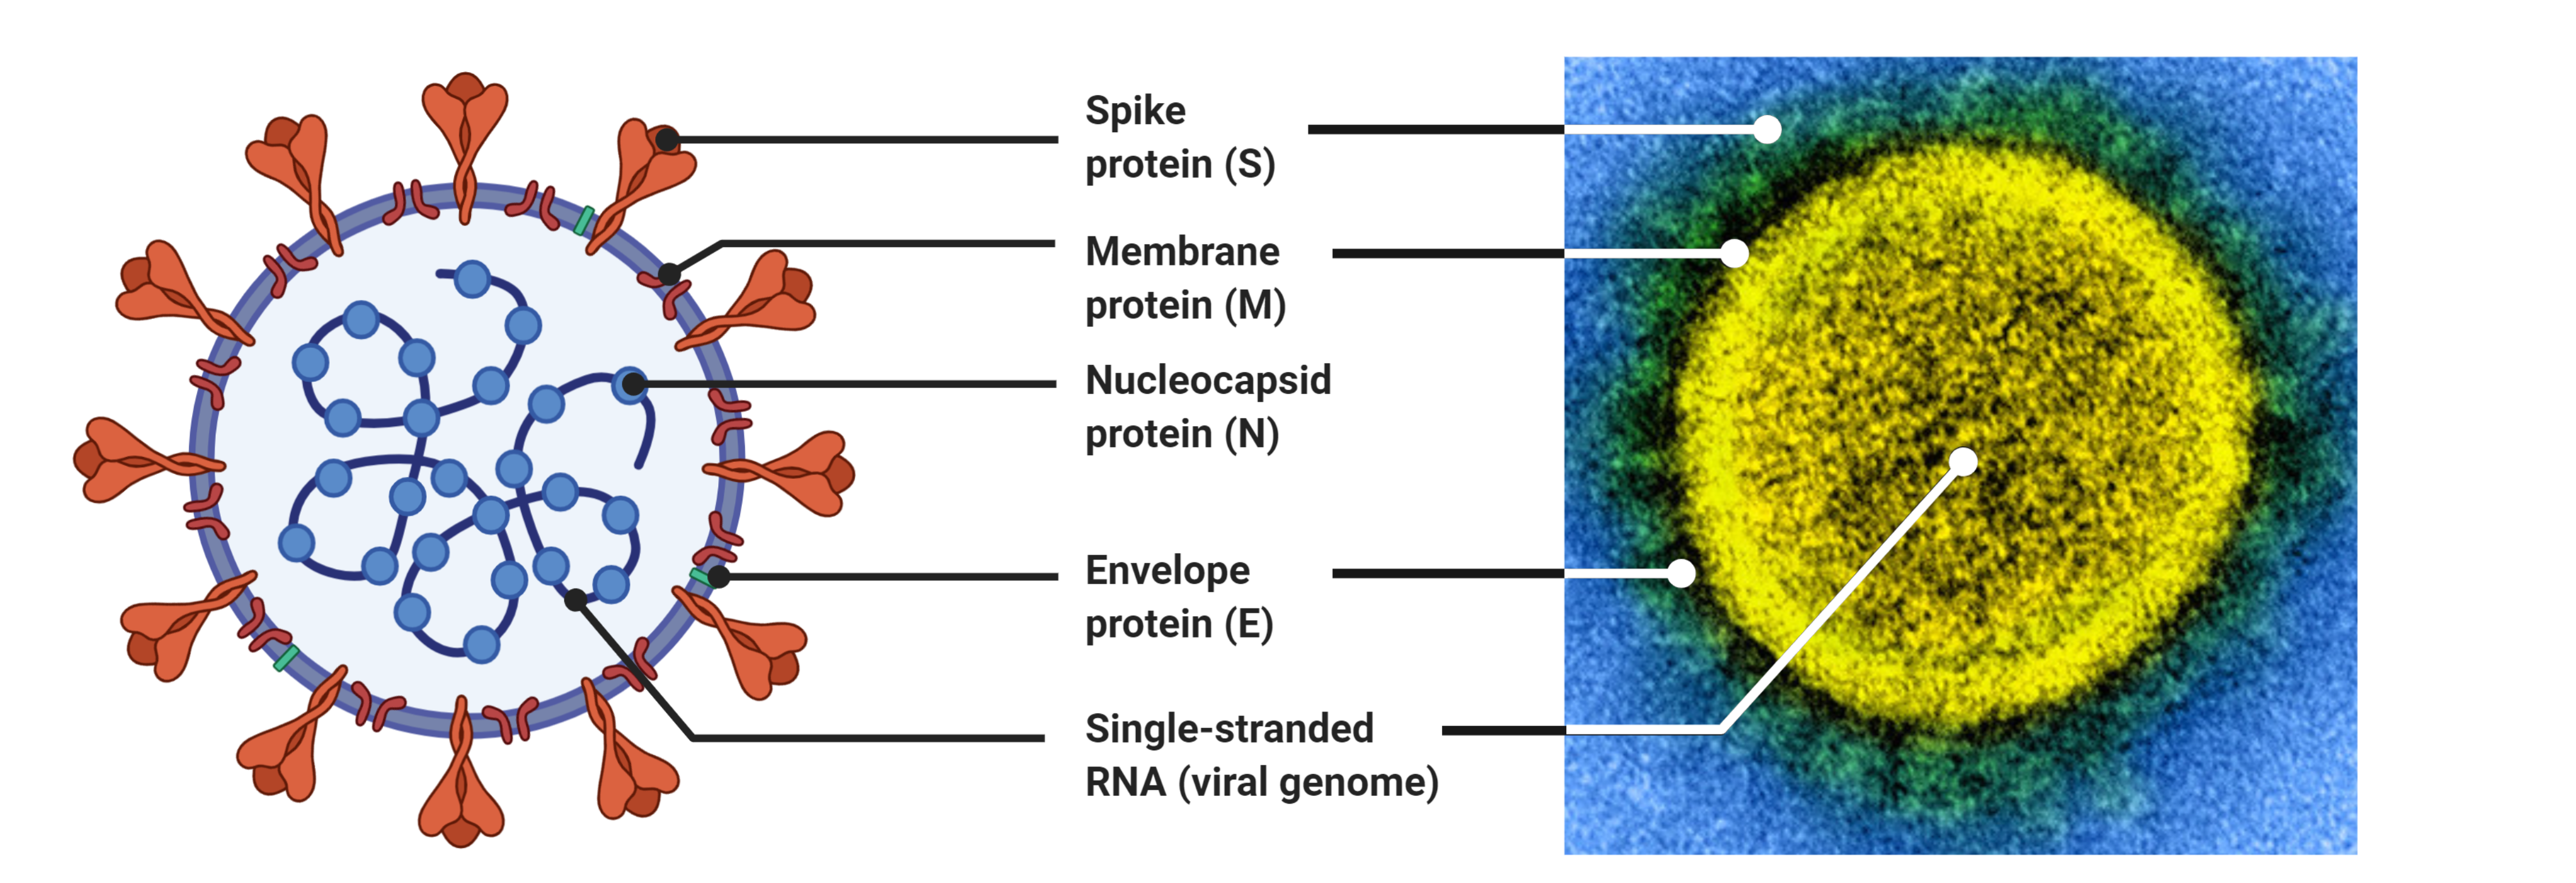 Figure 10: Structure of the SARS-CoV-2 virus. The development of vaccines depends on the immune system recognizing the virus. Here, the structure of SARS-CoV-2 is represented both in the abstract and against a visualization of the virion. The abstracted visualization was made using BioRender [1348] using the template “Human Coronavirus Structure” by BioRender (August 2020) [1349]. The microscopy was conducted by the National Institute of Allergy and Infectious Diseases [1350].